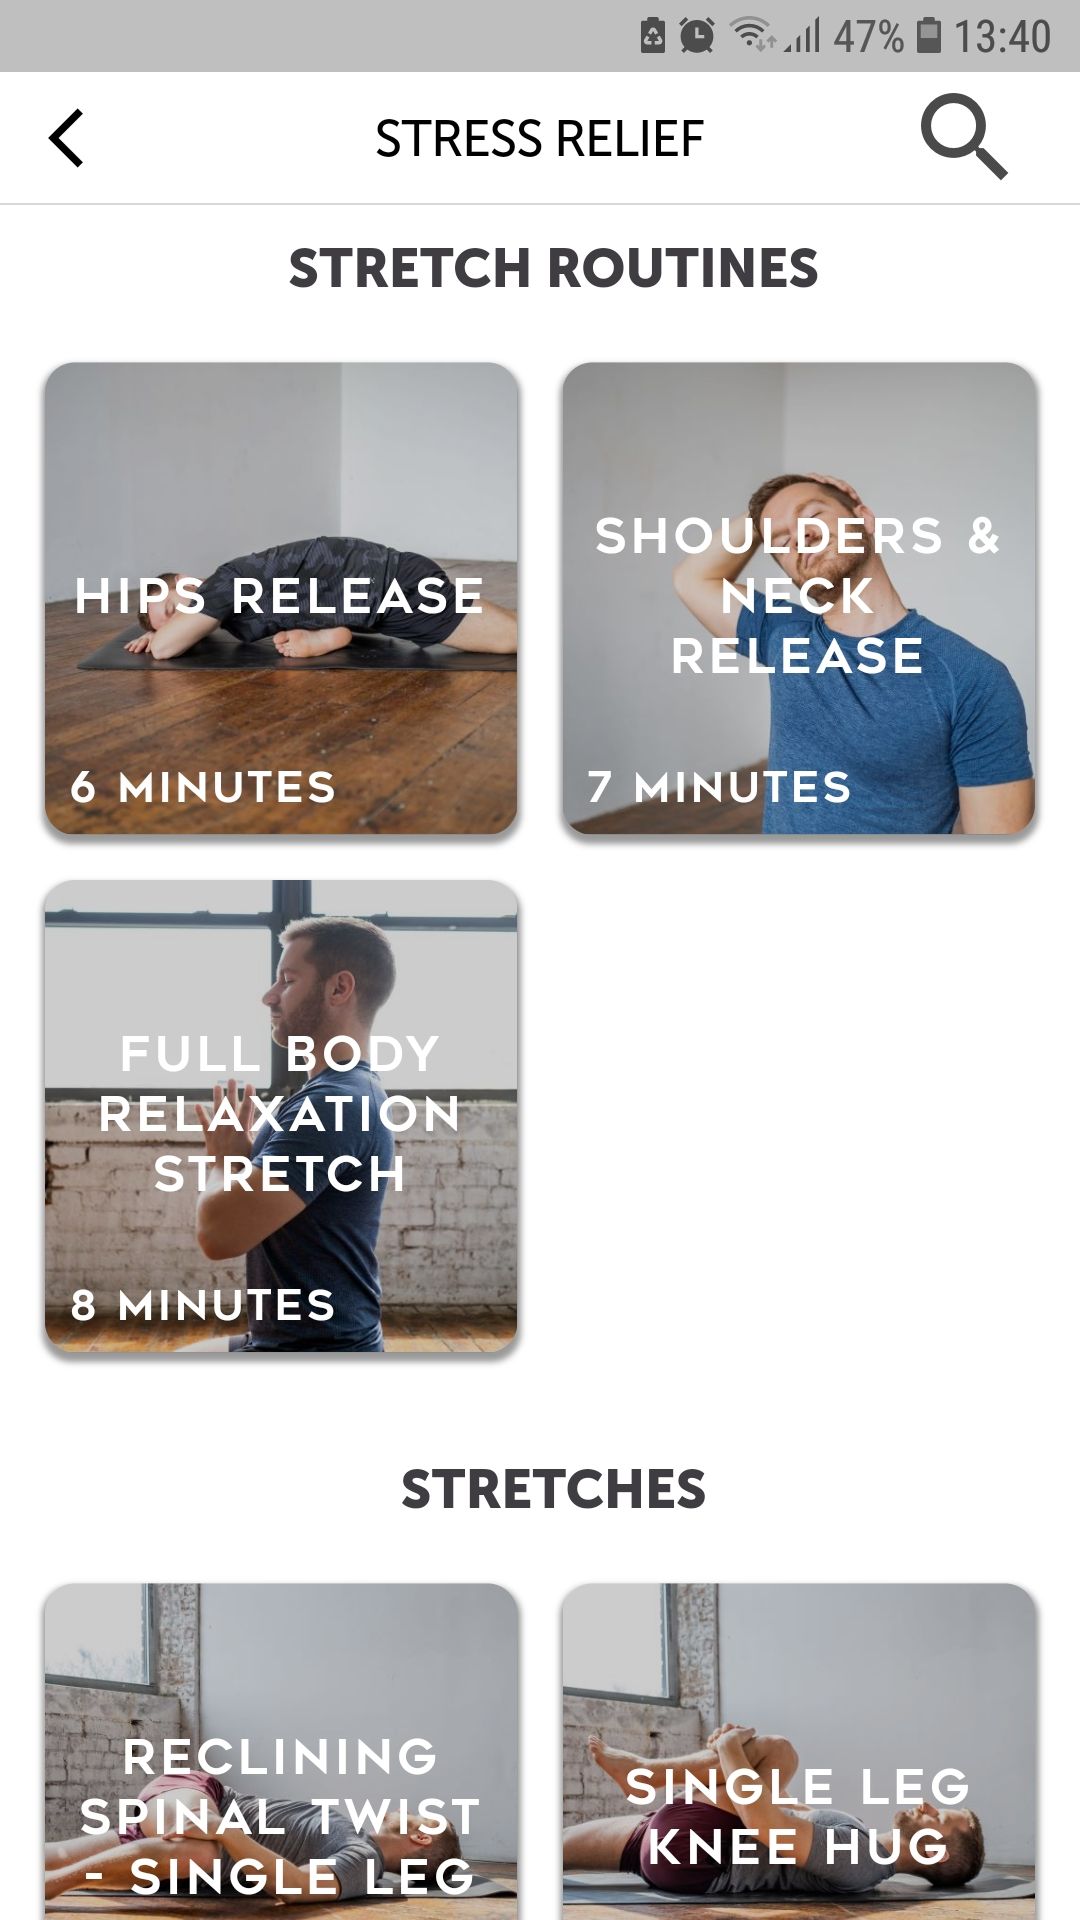 Stretch stress relief routines